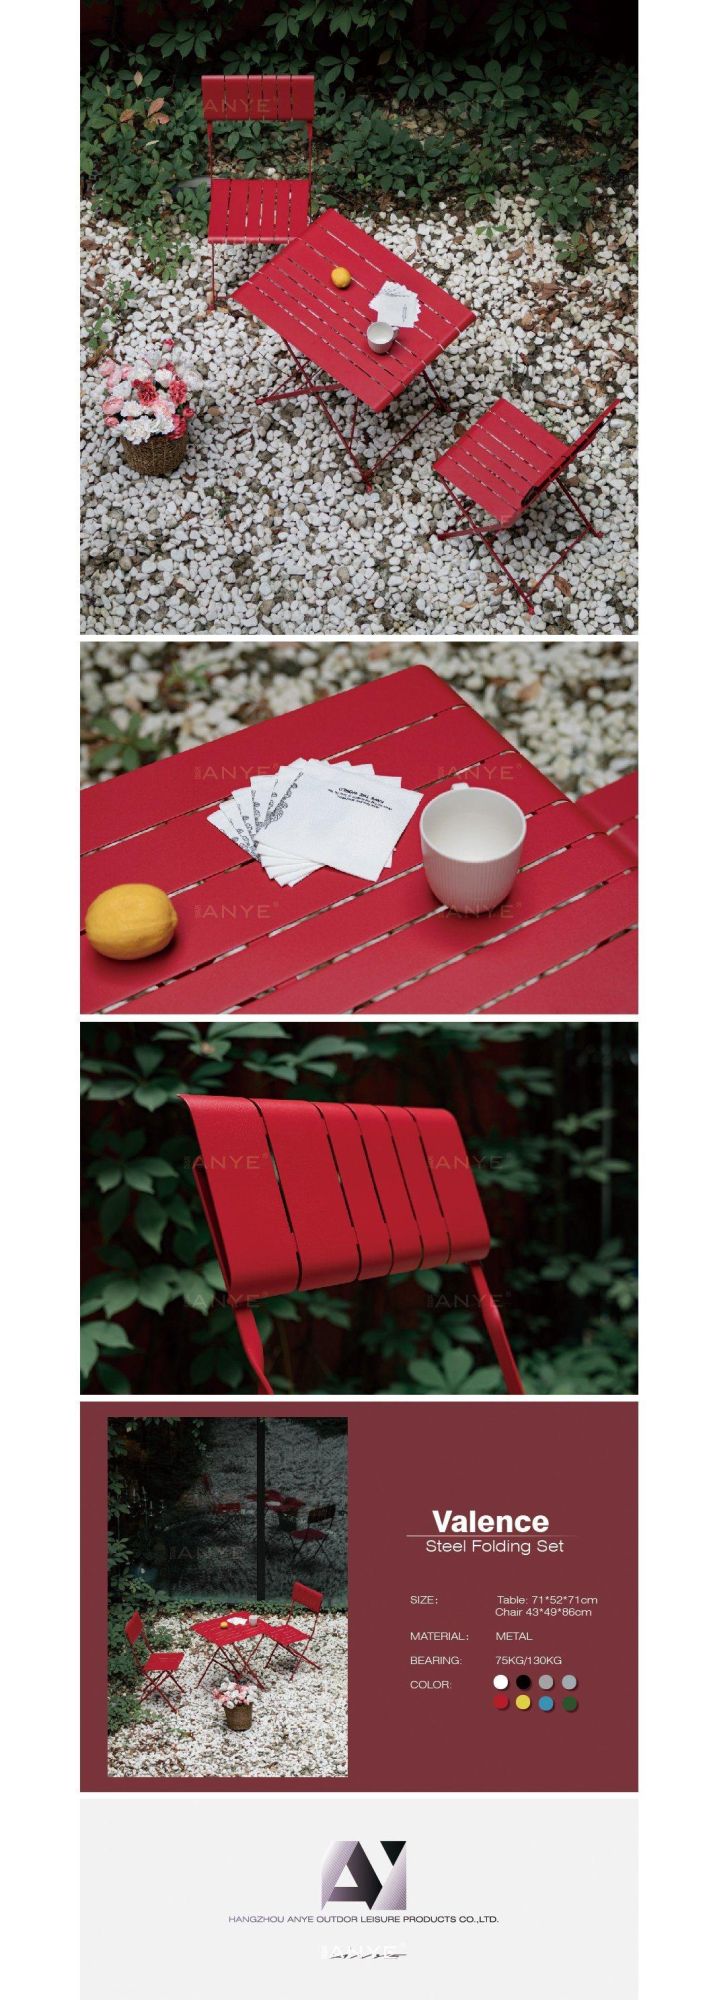 Rust Resistant Steel Slats Red Garden Furniture Dining Table Folding Chair Wedding Furniture